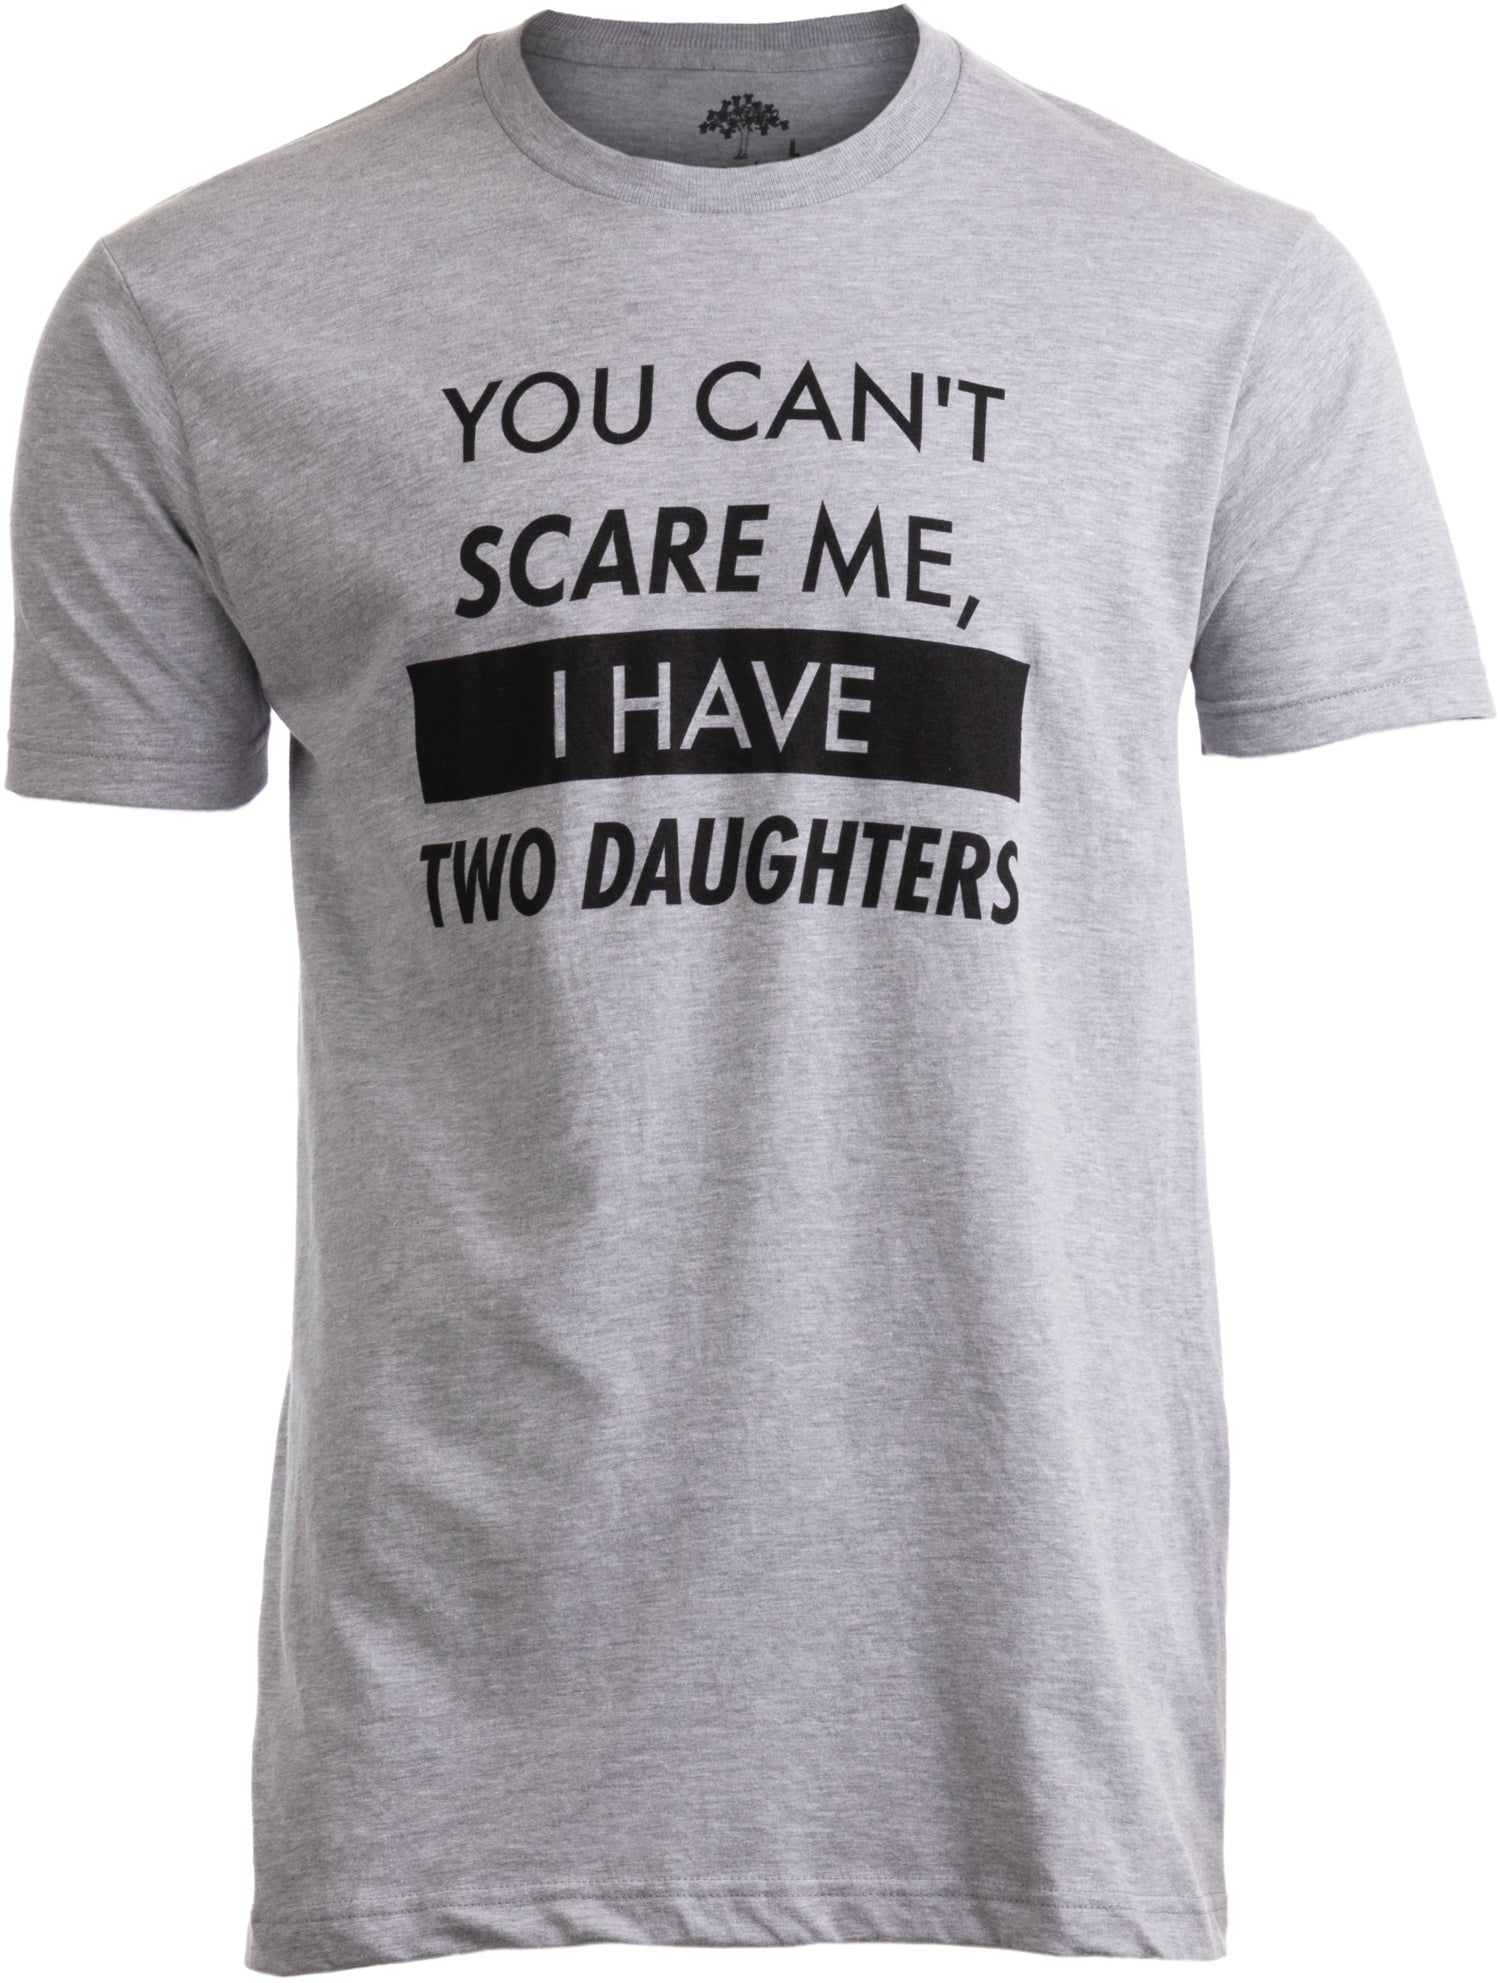 You Scare Me, I have Two Daughters" - Funny Dad Joke, Father T- Ann T-shirt Company